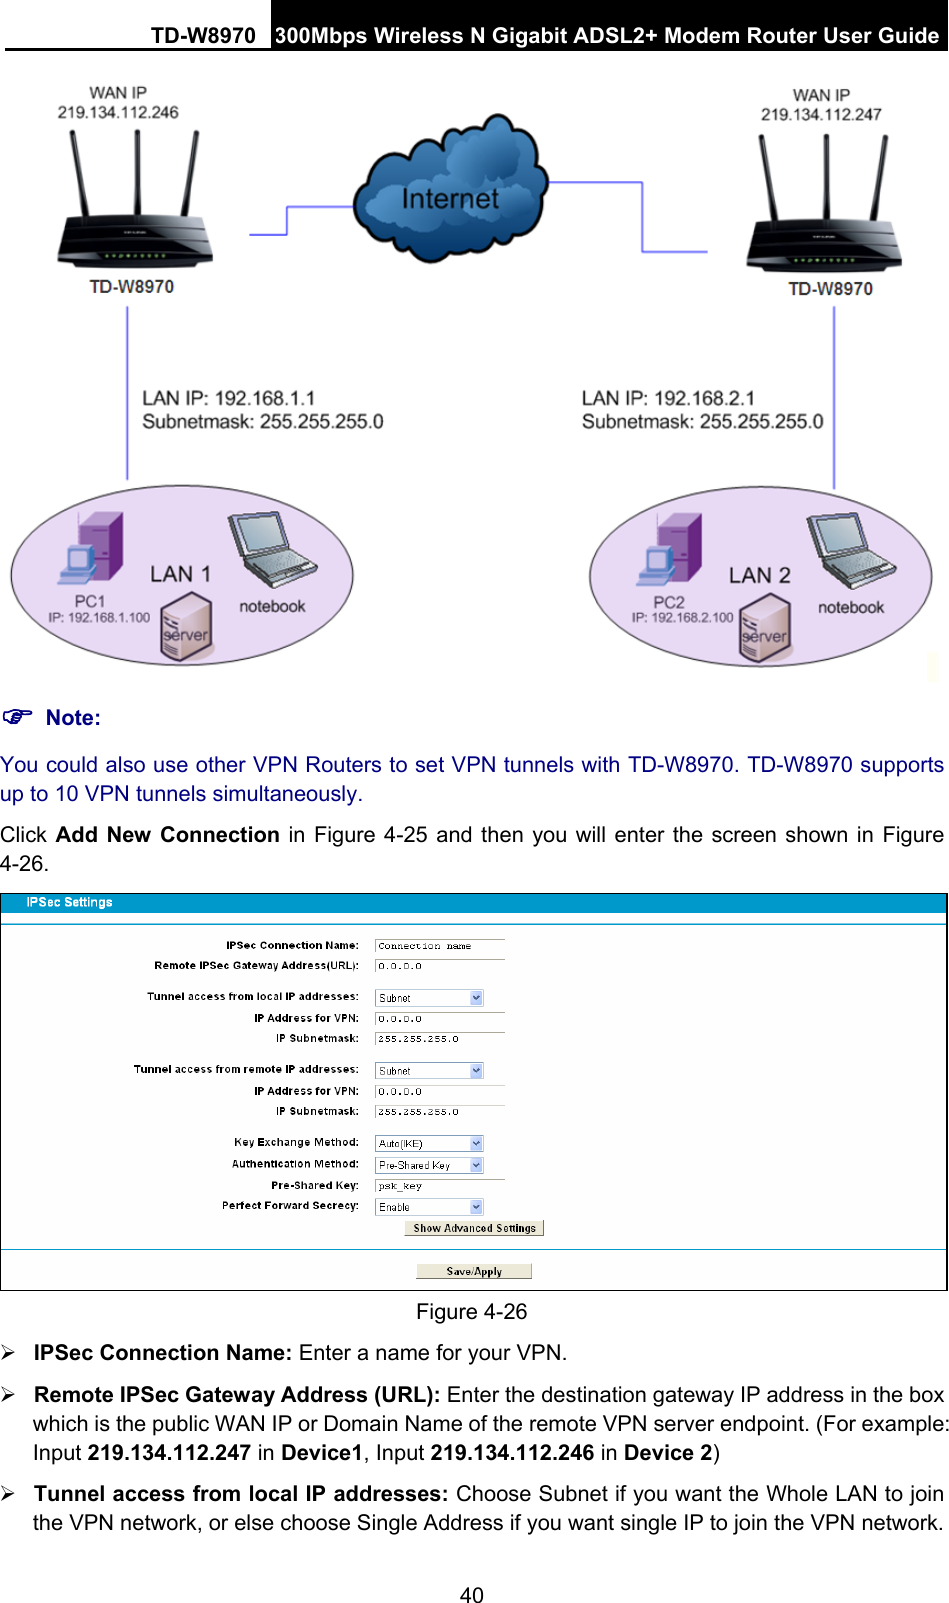 TD-W8970 300Mbps Wireless N Gigabit ADSL2+ Modem Router User Guide 40  ) Note: You could also use other VPN Routers to set VPN tunnels with TD-W8970. TD-W8970 supports up to 10 VPN tunnels simultaneously. Click Add New Connection in Figure 4-25 and then you will enter the screen shown in Figure 4-26.  Figure 4-26 ¾ IPSec Connection Name: Enter a name for your VPN. ¾ Remote IPSec Gateway Address (URL): Enter the destination gateway IP address in the box which is the public WAN IP or Domain Name of the remote VPN server endpoint. (For example: Input 219.134.112.247 in Device1, Input 219.134.112.246 in Device 2) ¾ Tunnel access from local IP addresses: Choose Subnet if you want the Whole LAN to join the VPN network, or else choose Single Address if you want single IP to join the VPN network. 